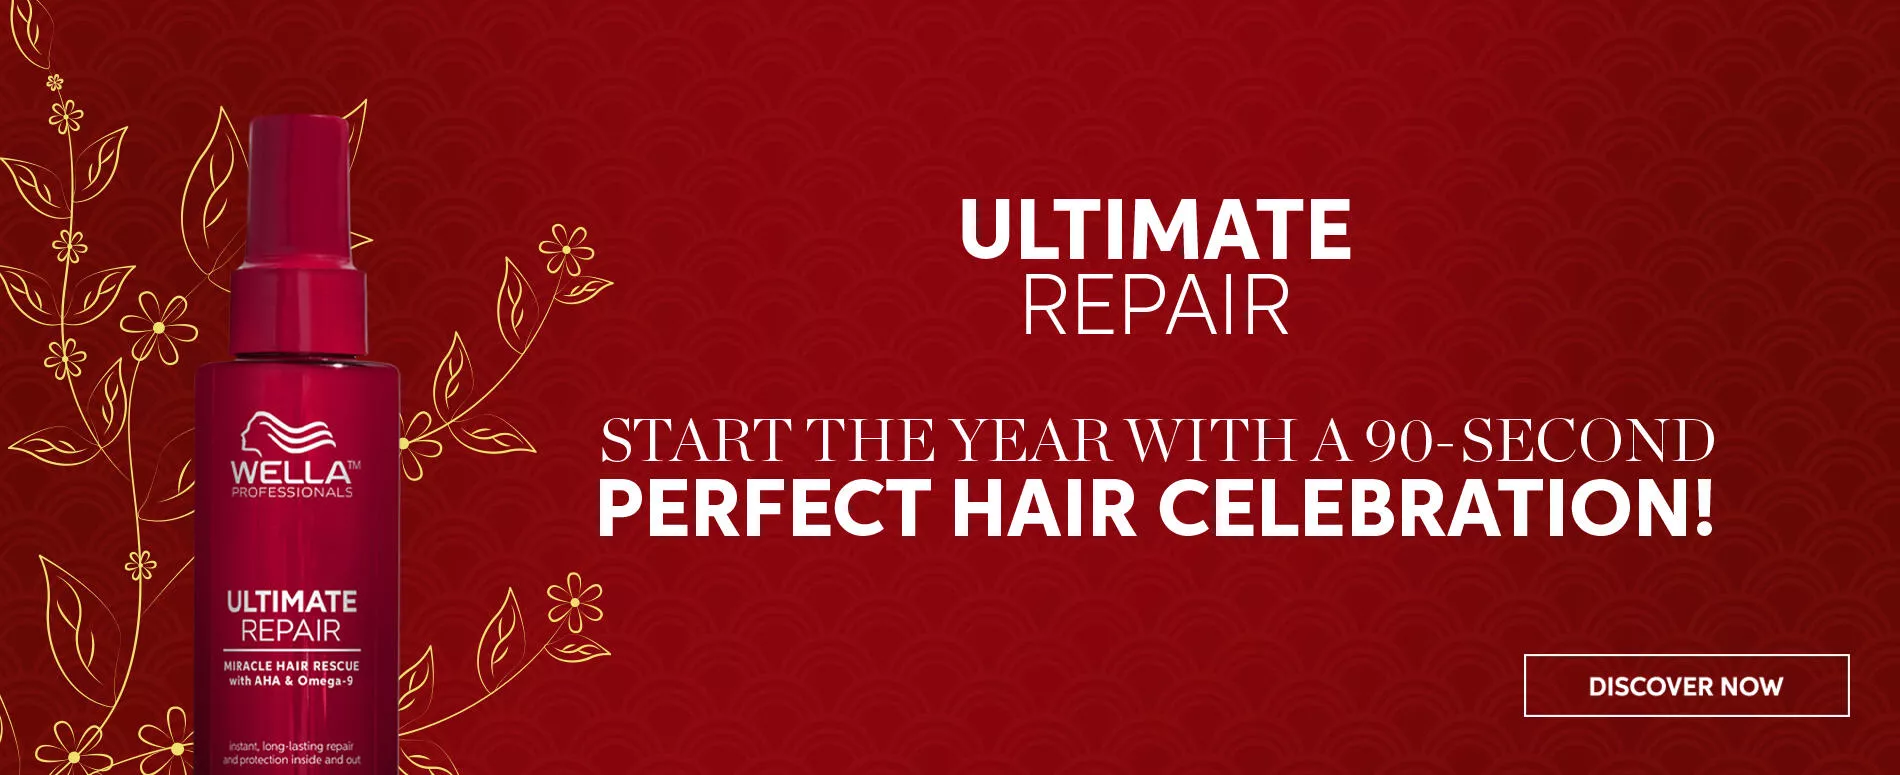 Ultimate Repair, Start The Year With A 90-Second Perfect Hair Celebration!